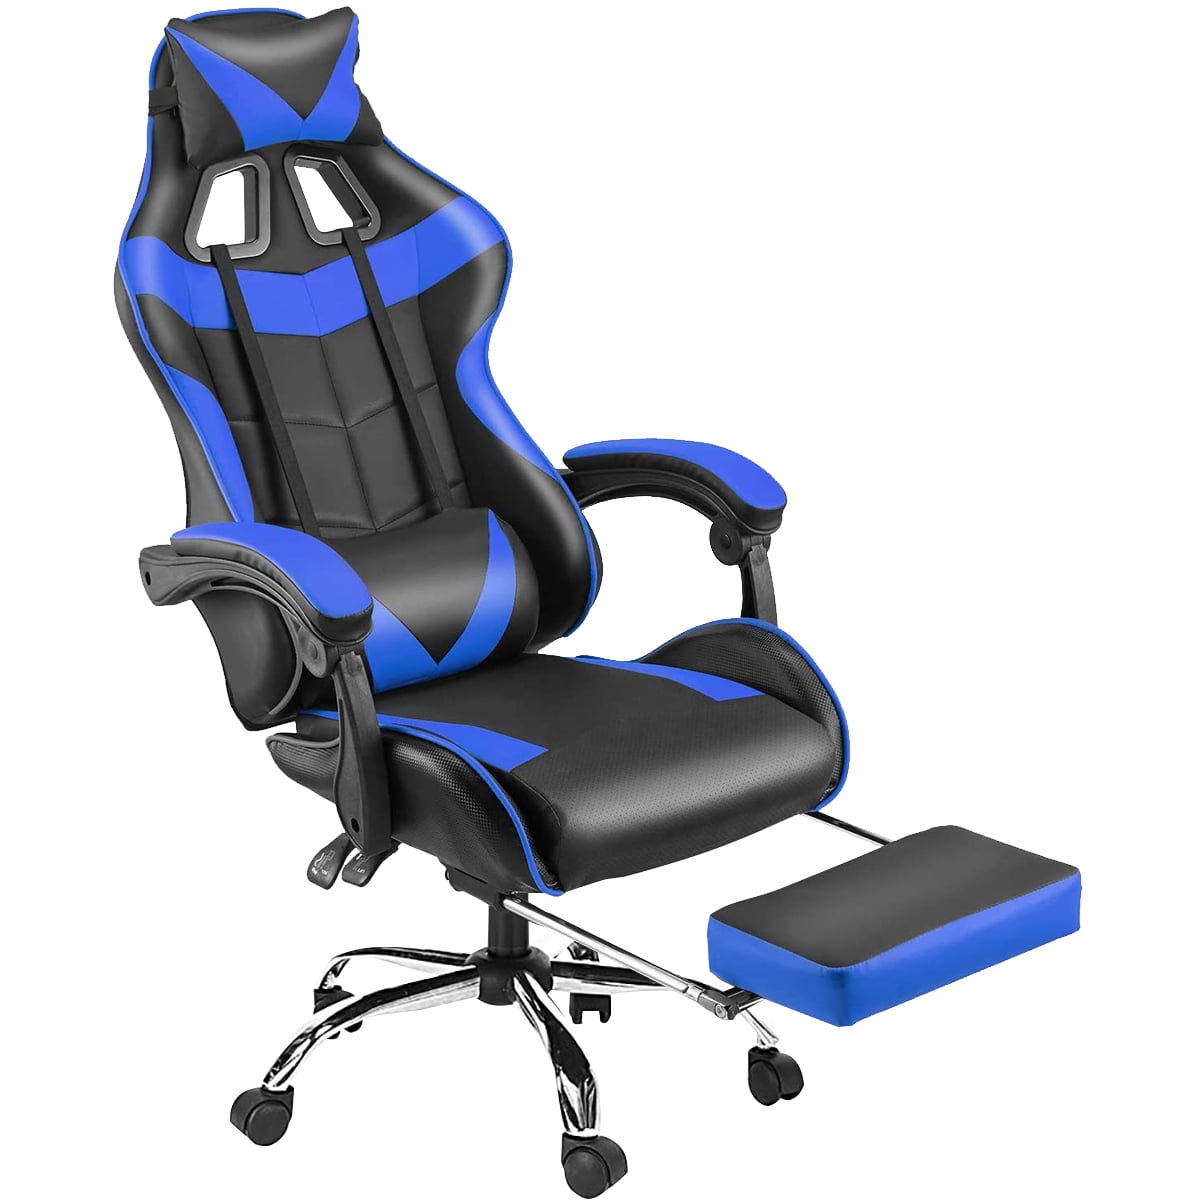 Racing Gaming Chair Office Computer Seat Chear Swivel Leather Recliner Footrest 